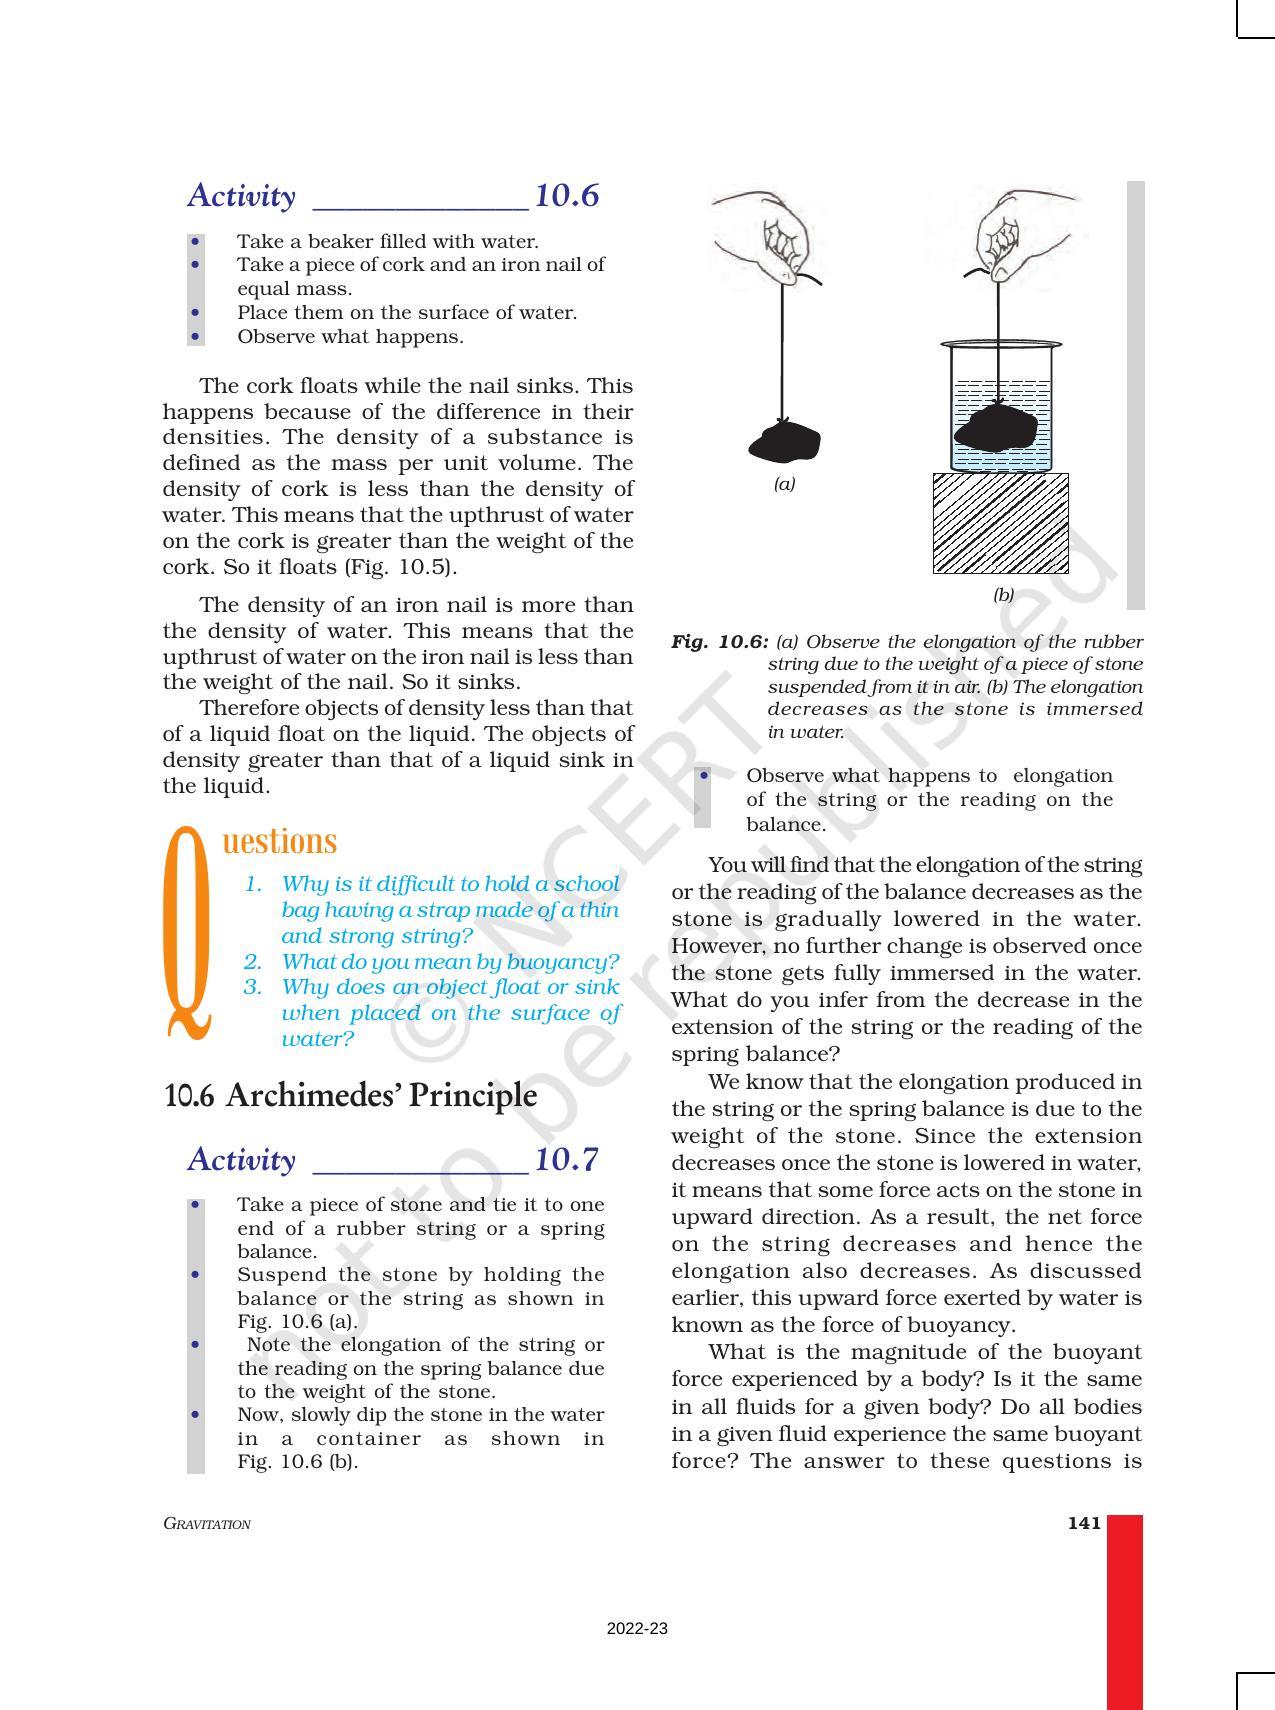 NCERT Book for Class 9 Science Chapter 10 Gravitation - Page 11